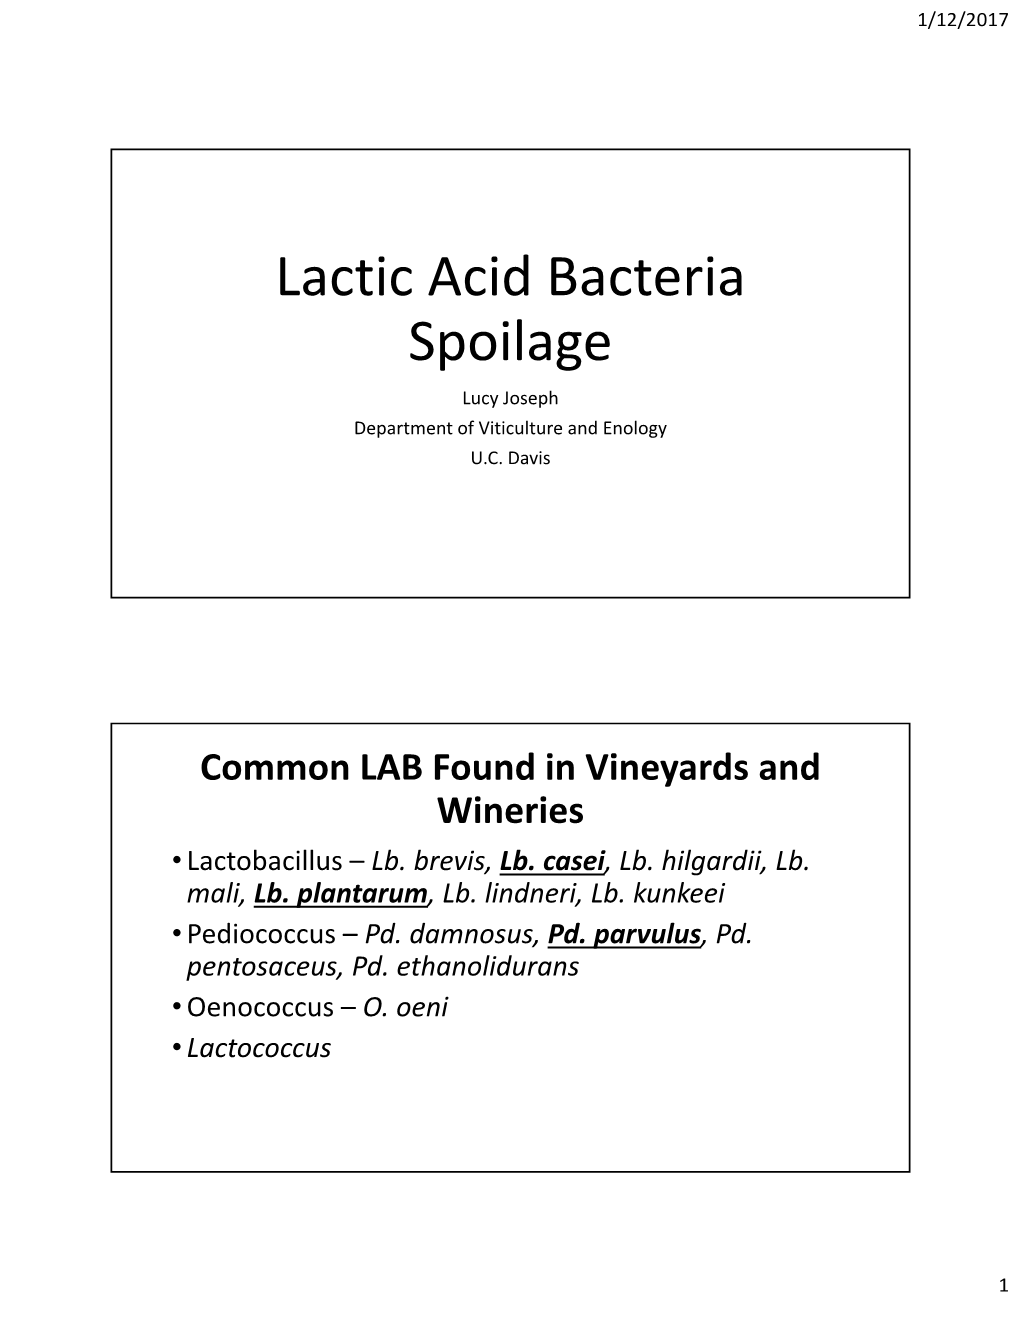 Lactic Acid Bacteria Spoilage Lucy Joseph Department of Viticulture and Enology U.C